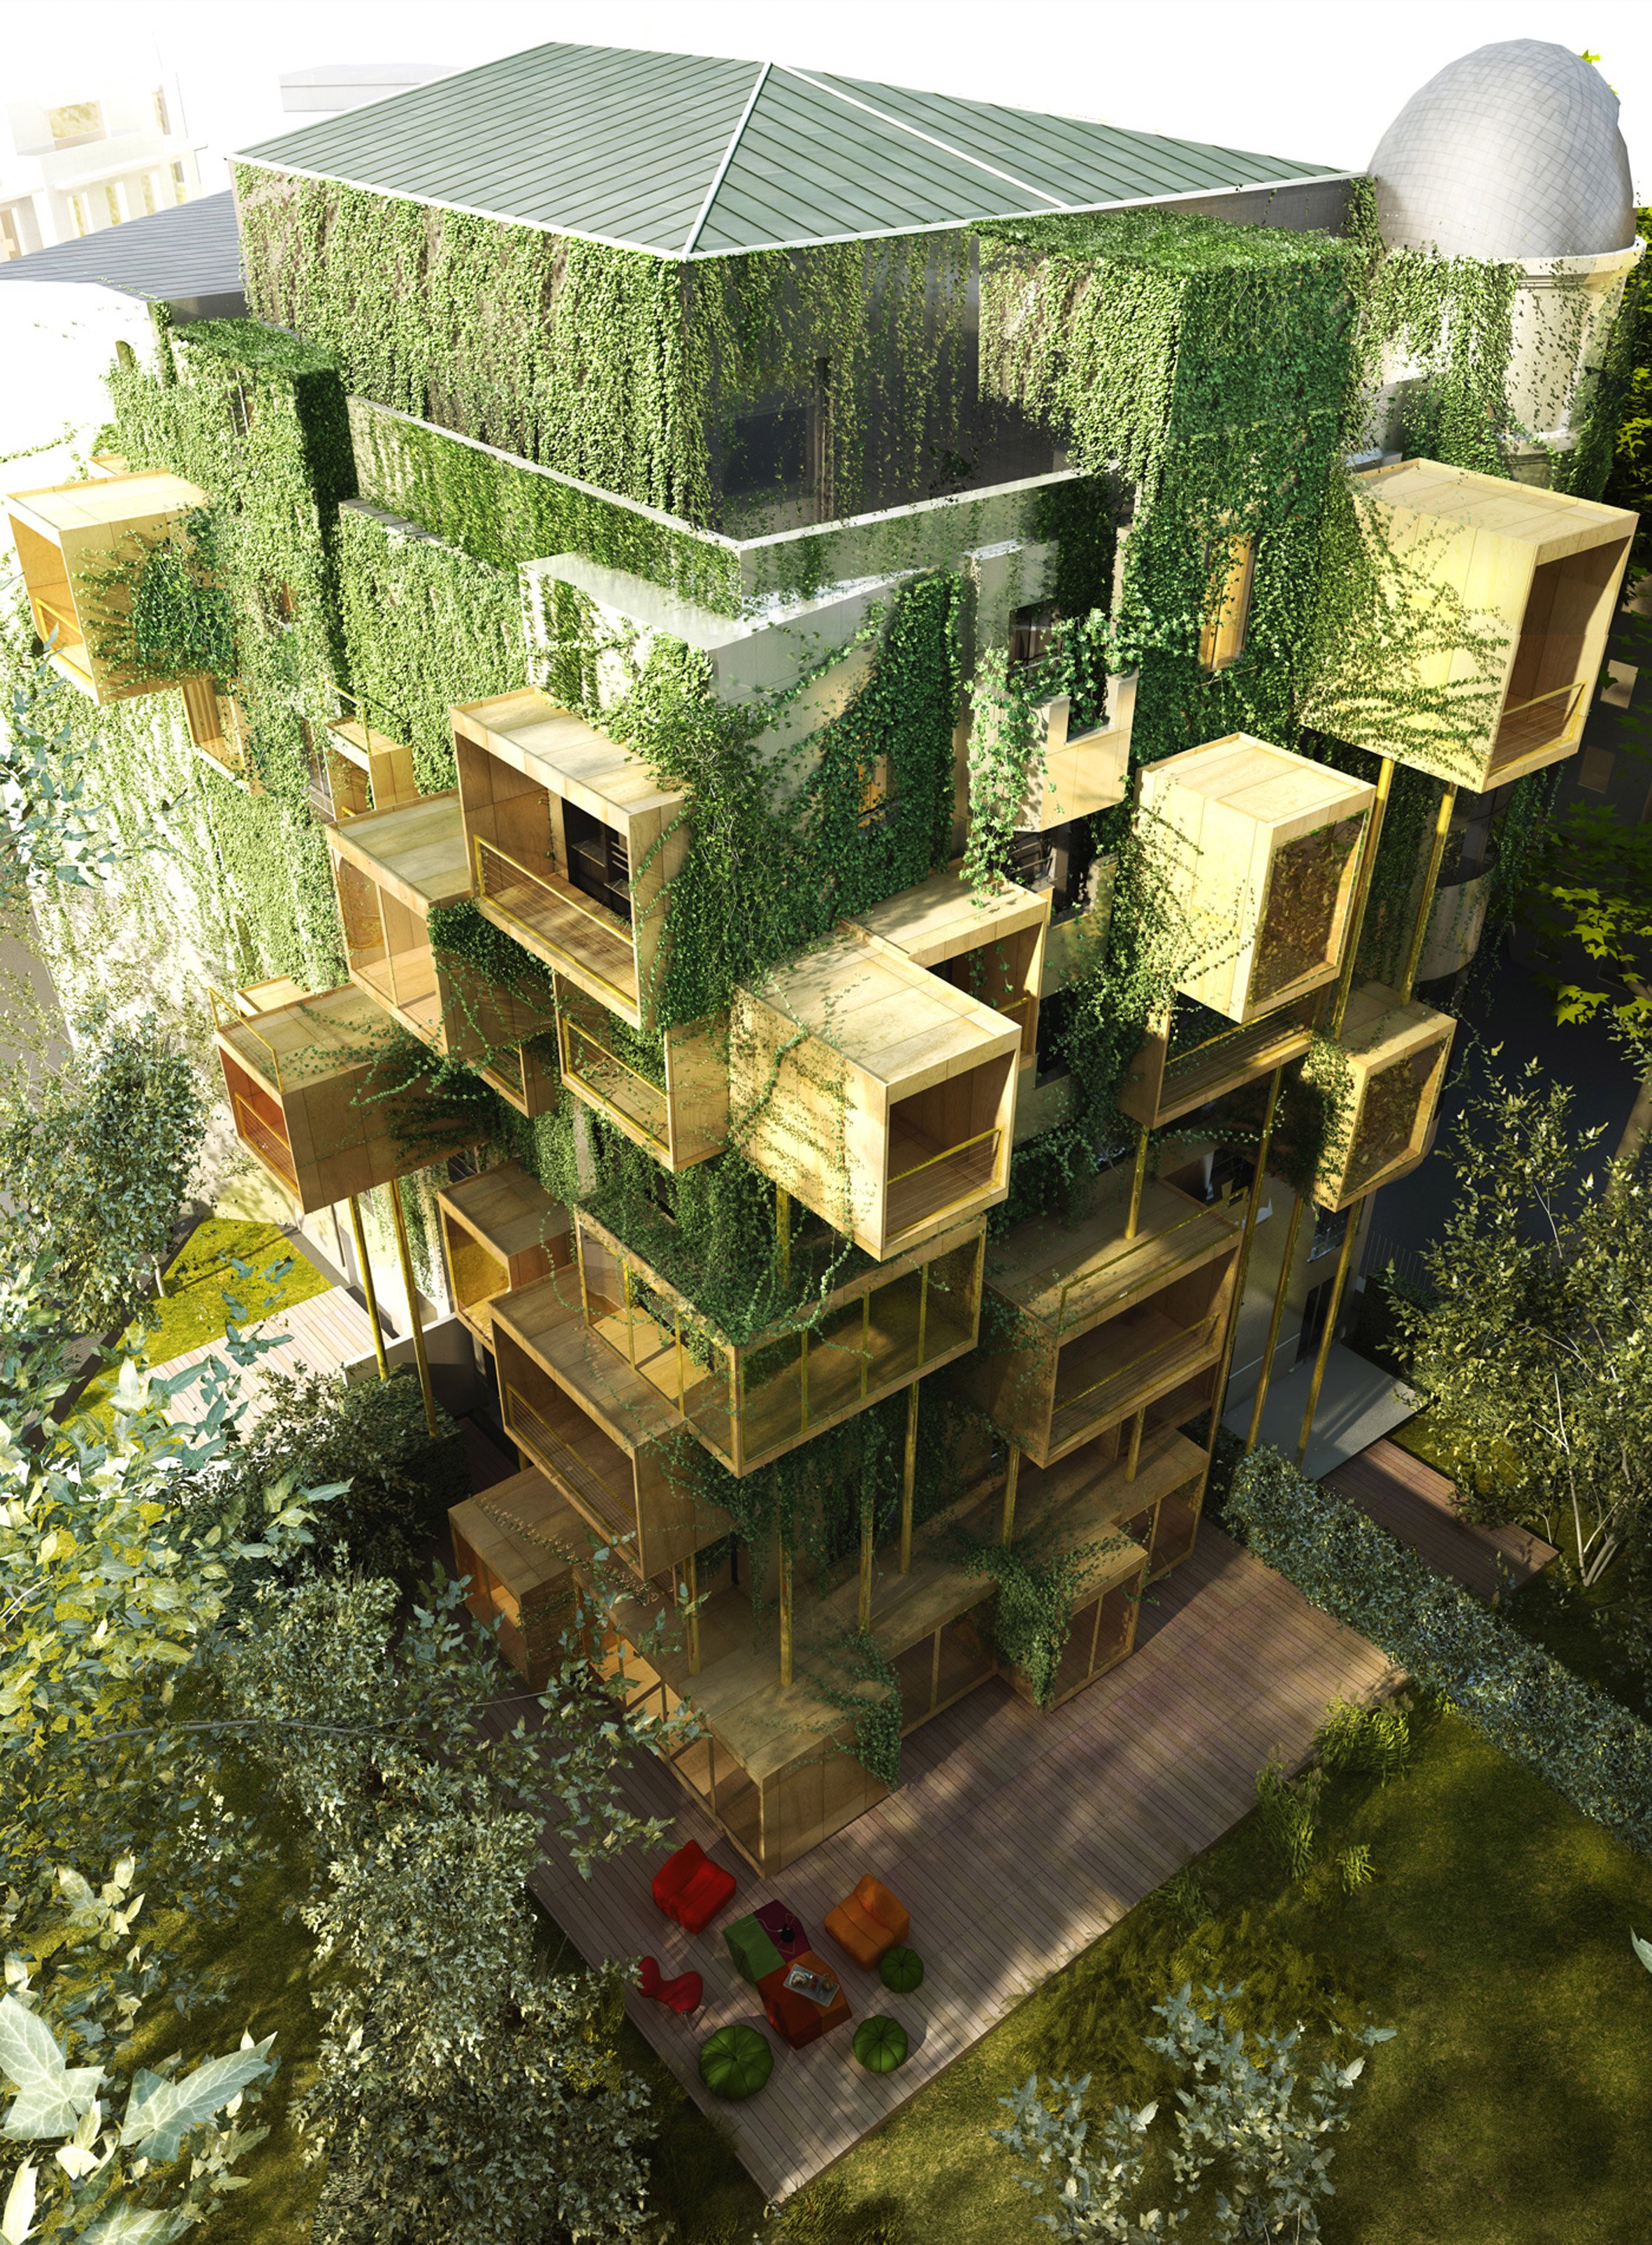 Malka Architecture has proposed adding cubed parasitic extensions to an apartment building in Paris